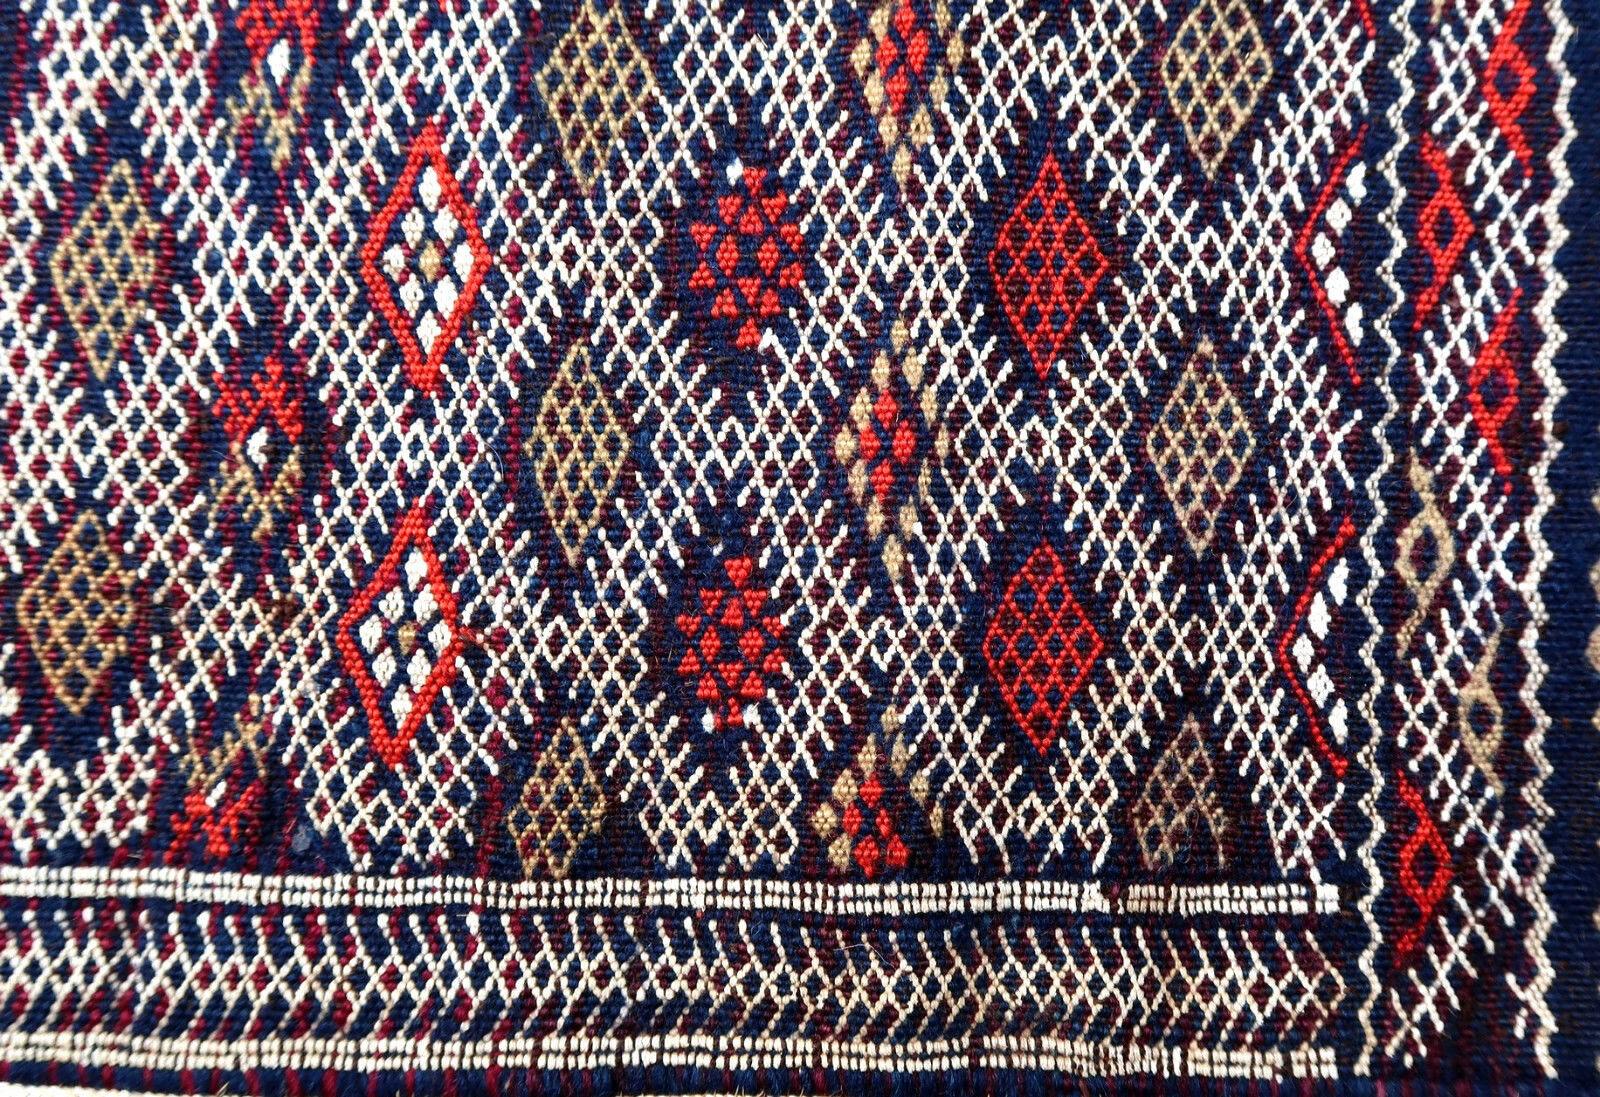 Handmade Vintage Moroccan Berber Kilim Cushion, 1950s, 1P44 In Good Condition For Sale In Bordeaux, FR